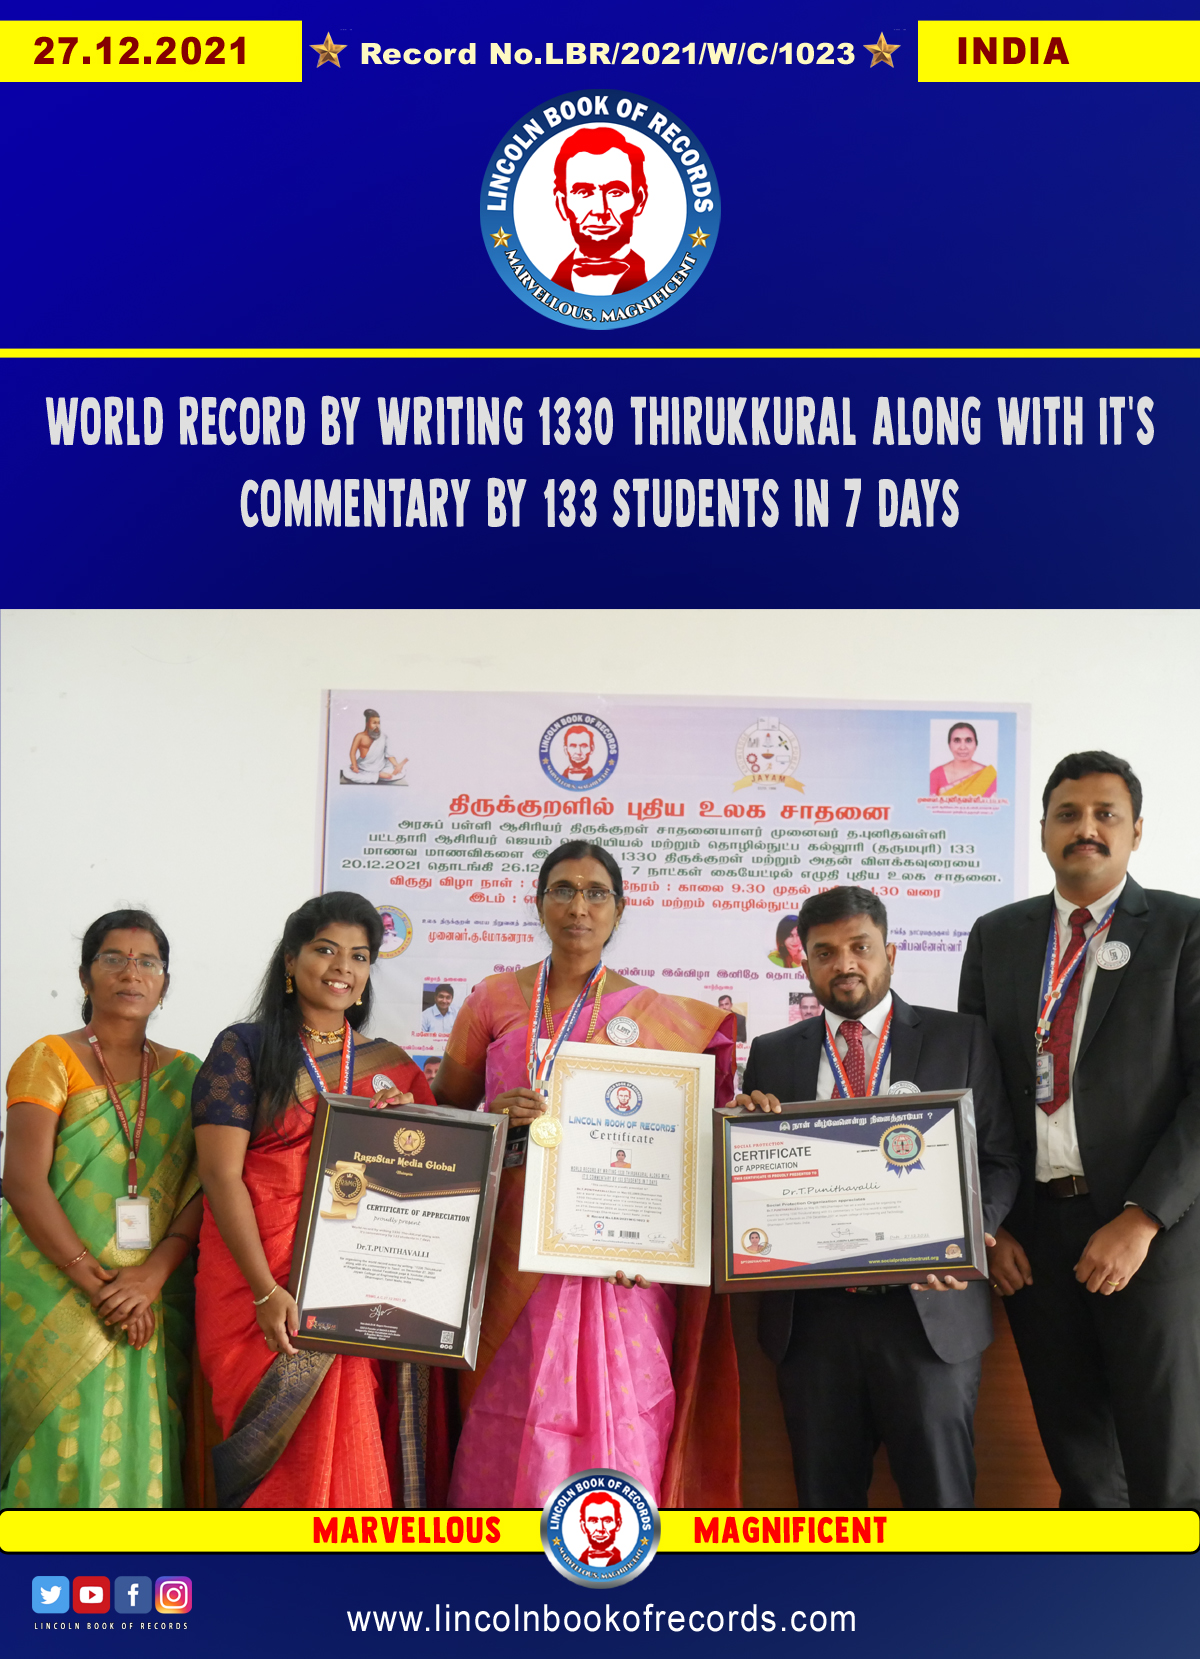 World record by writing 1330 ThirukKural along with  IT’S commentary by 133 students in 7 days